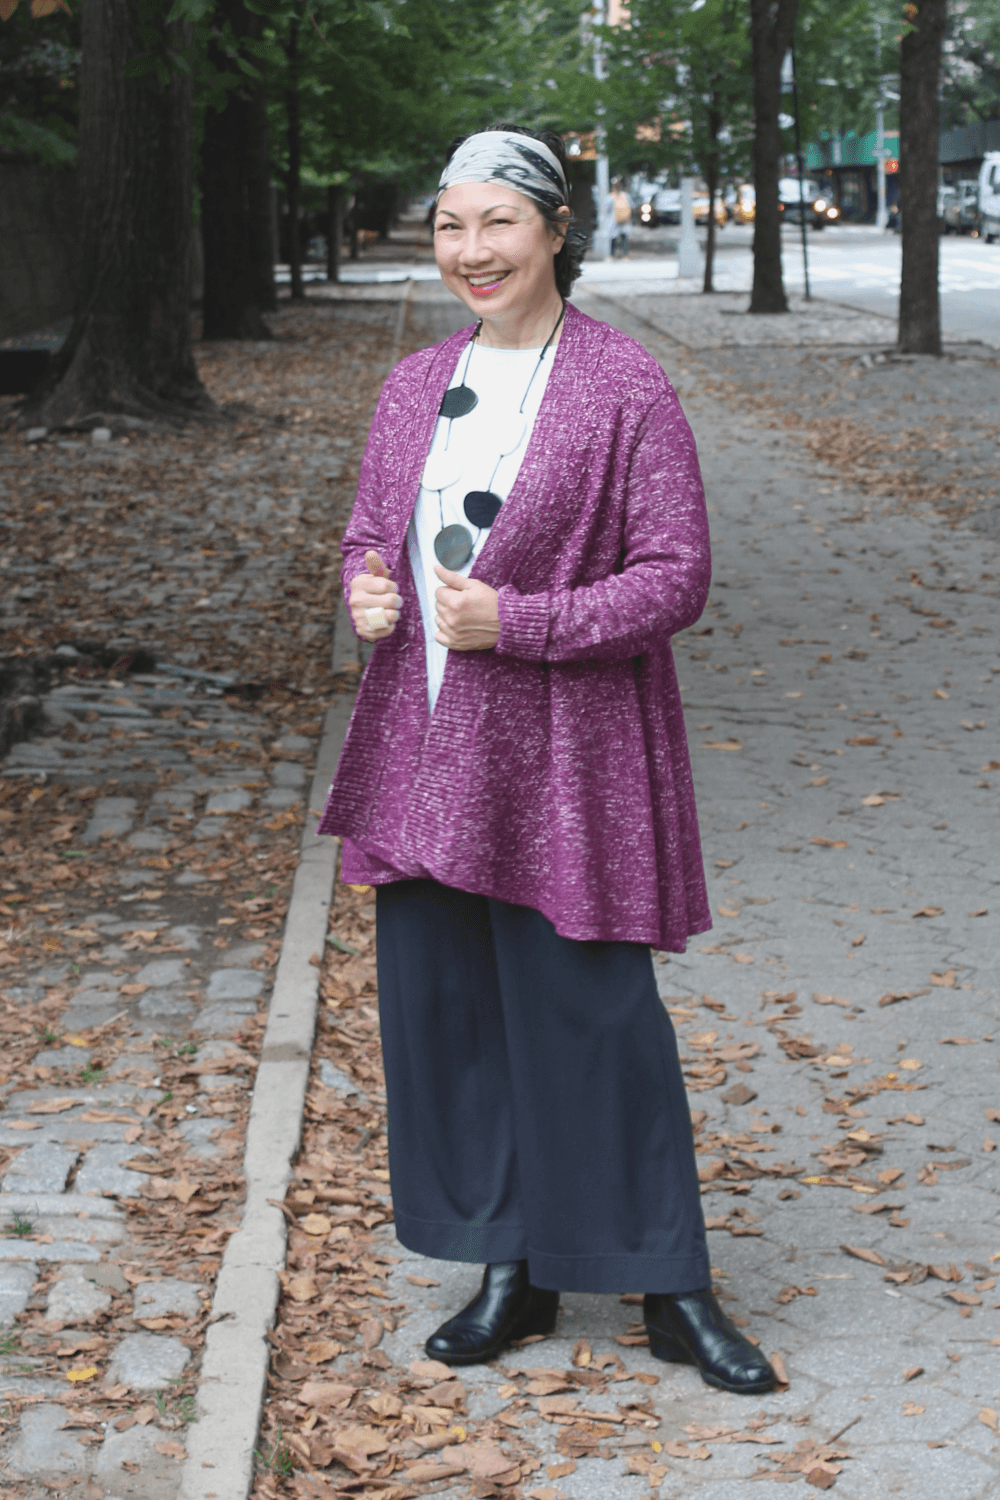 Woman standing in a park wearing a plum colored Cardigan with black full cut pants, a white top and a black and white necklace.